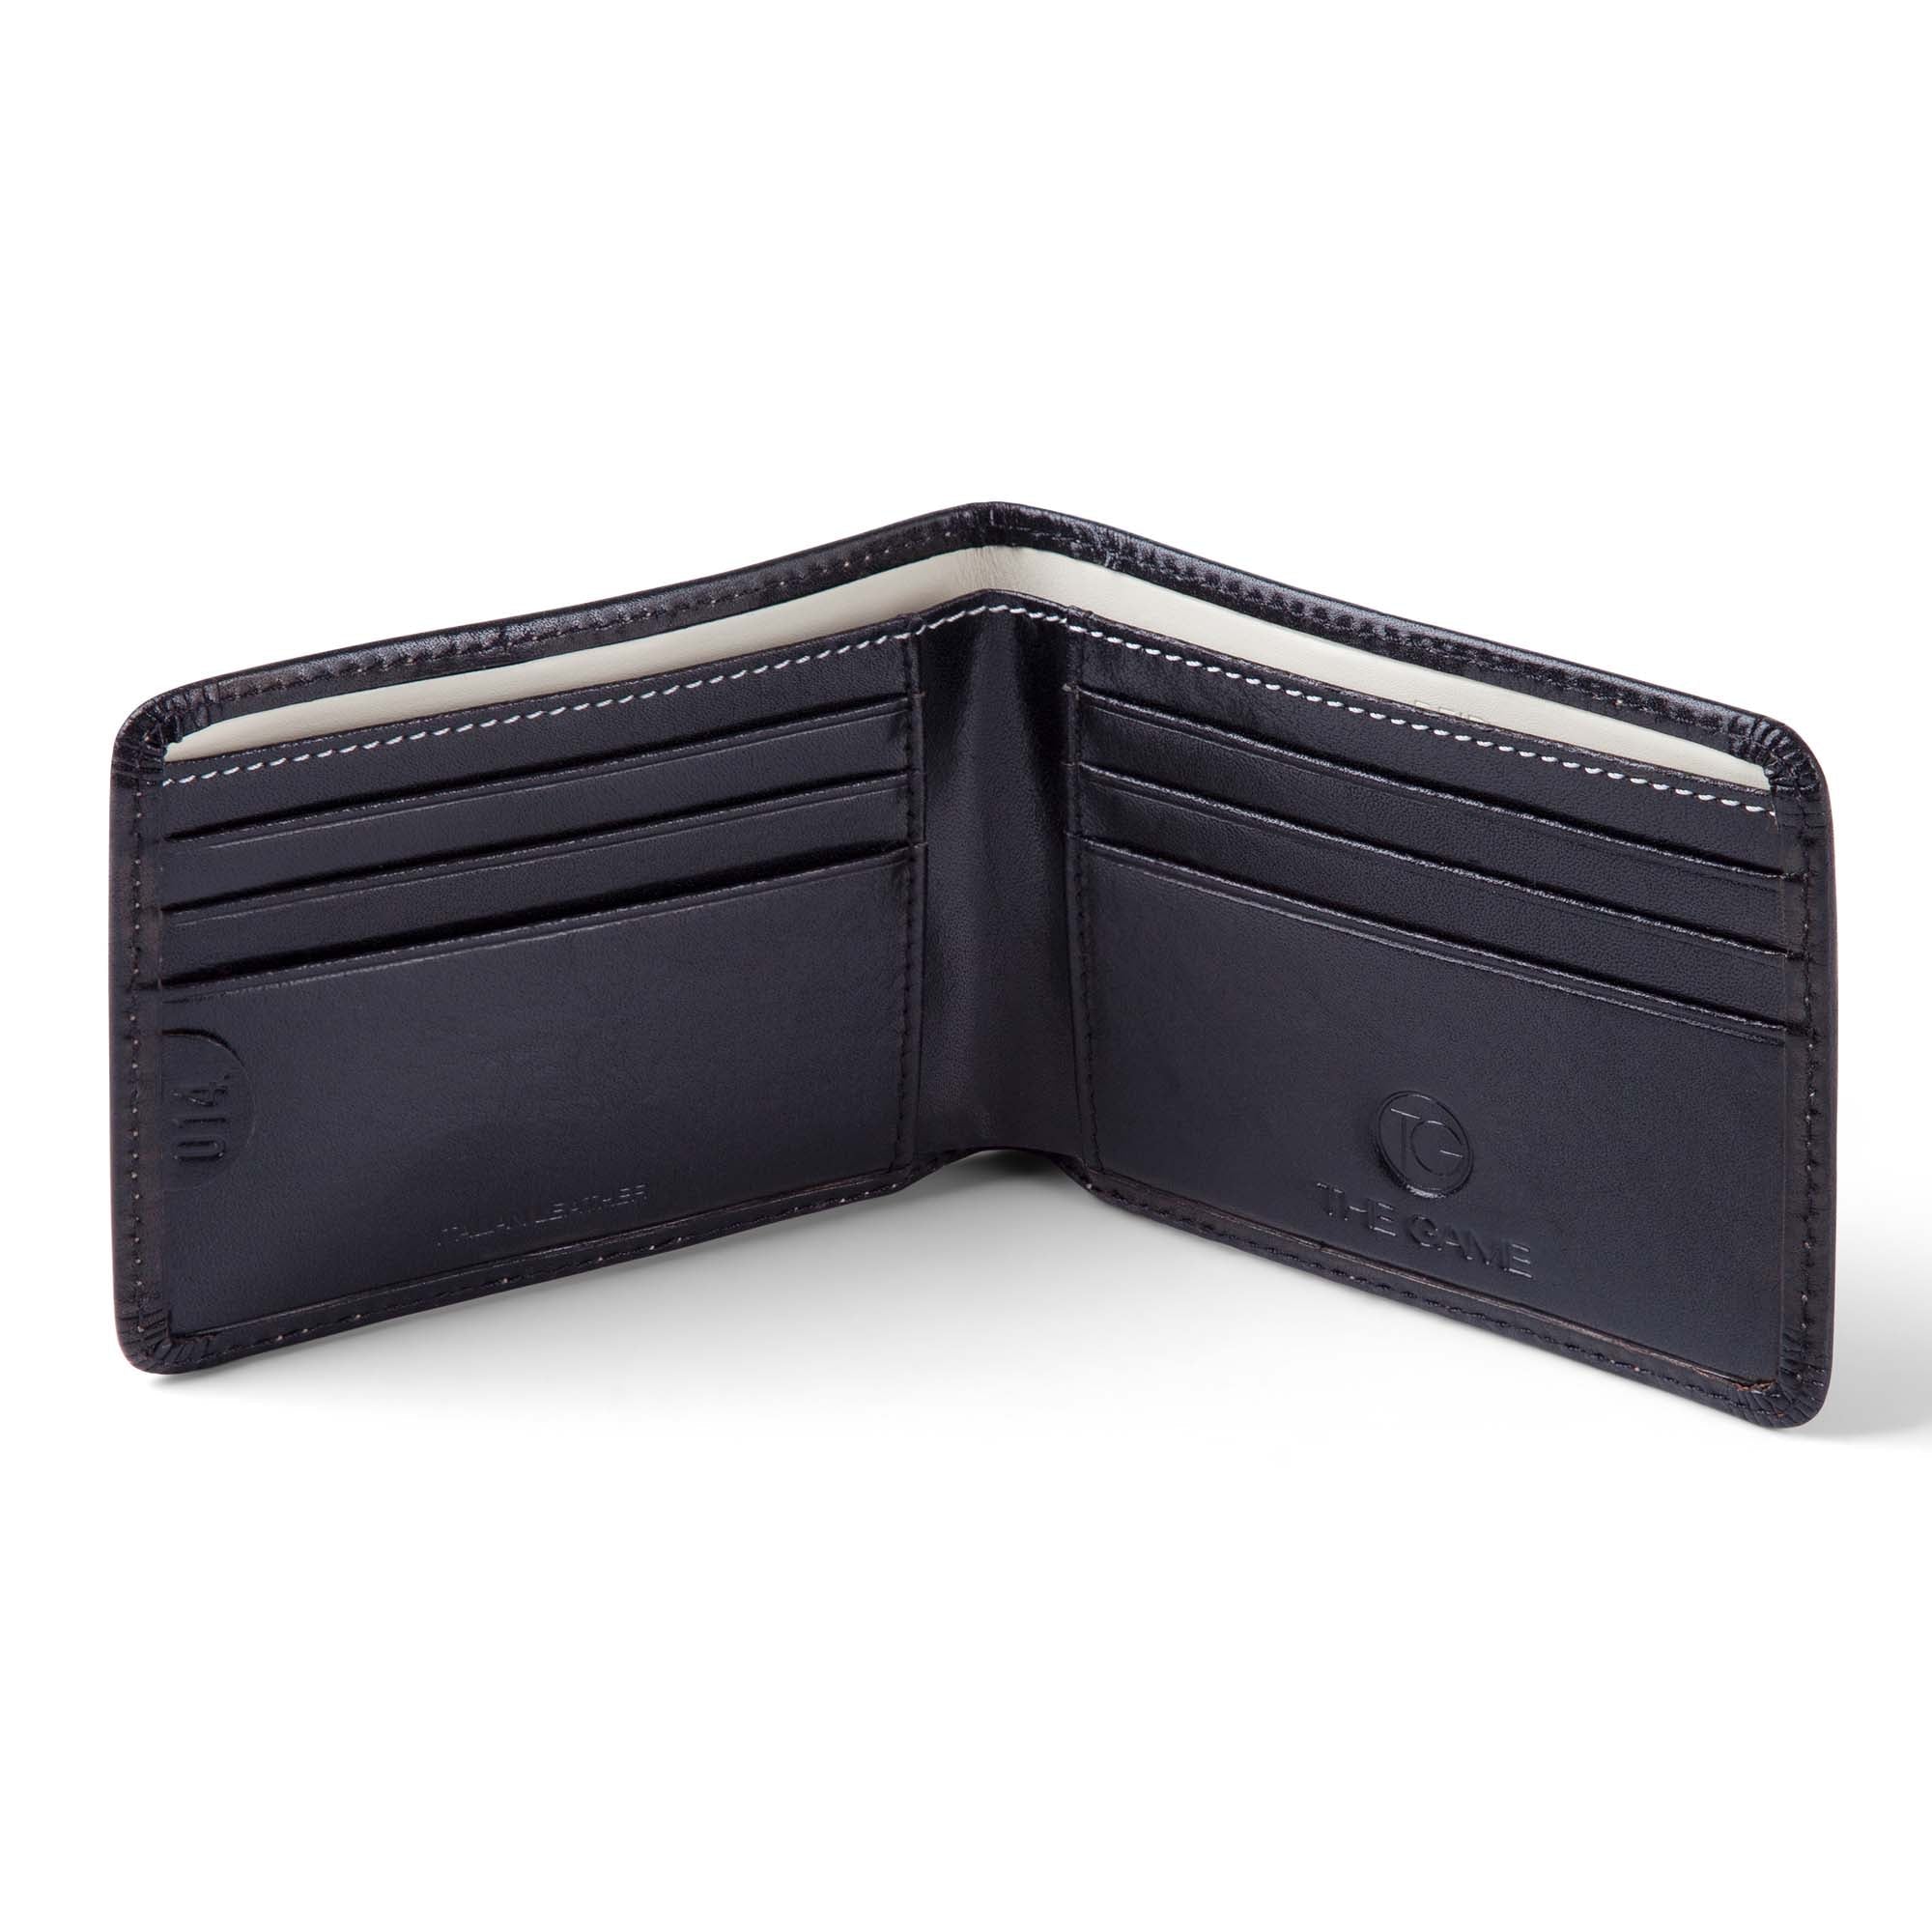 The International - Limited Edition Wallet - The Game